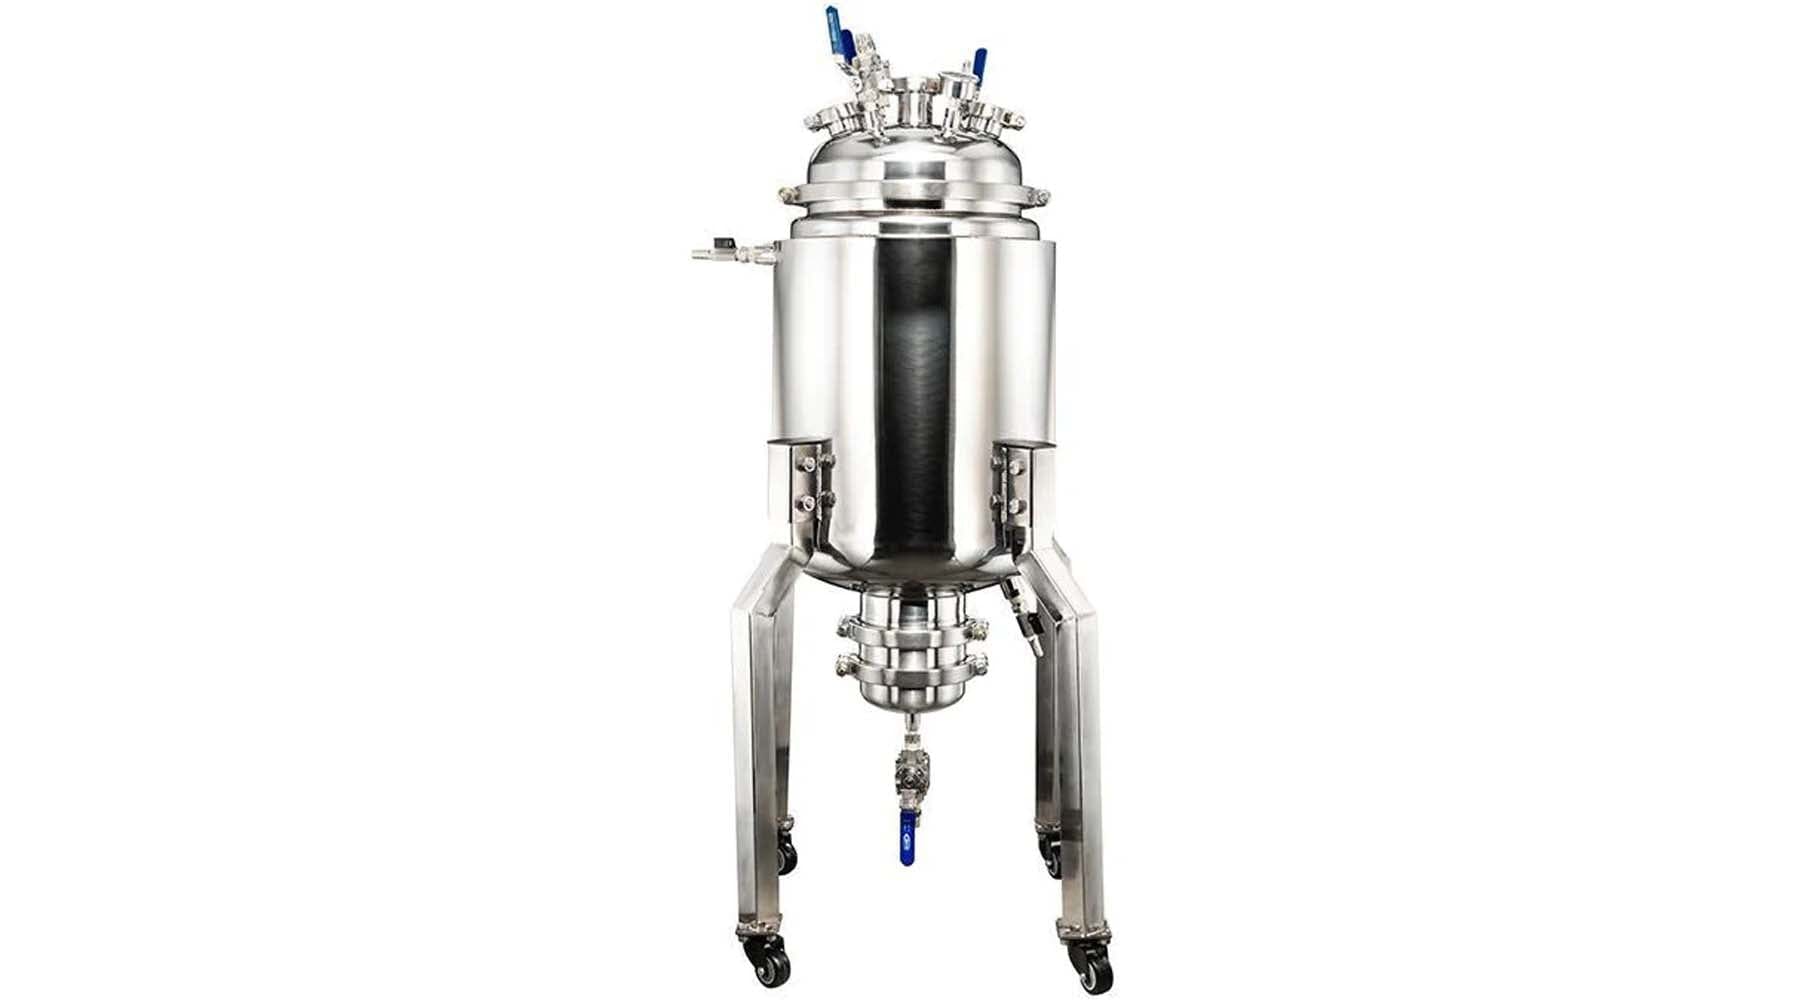 Detailed Instructions for Stainless Steel Reactor Ethanol Extraction